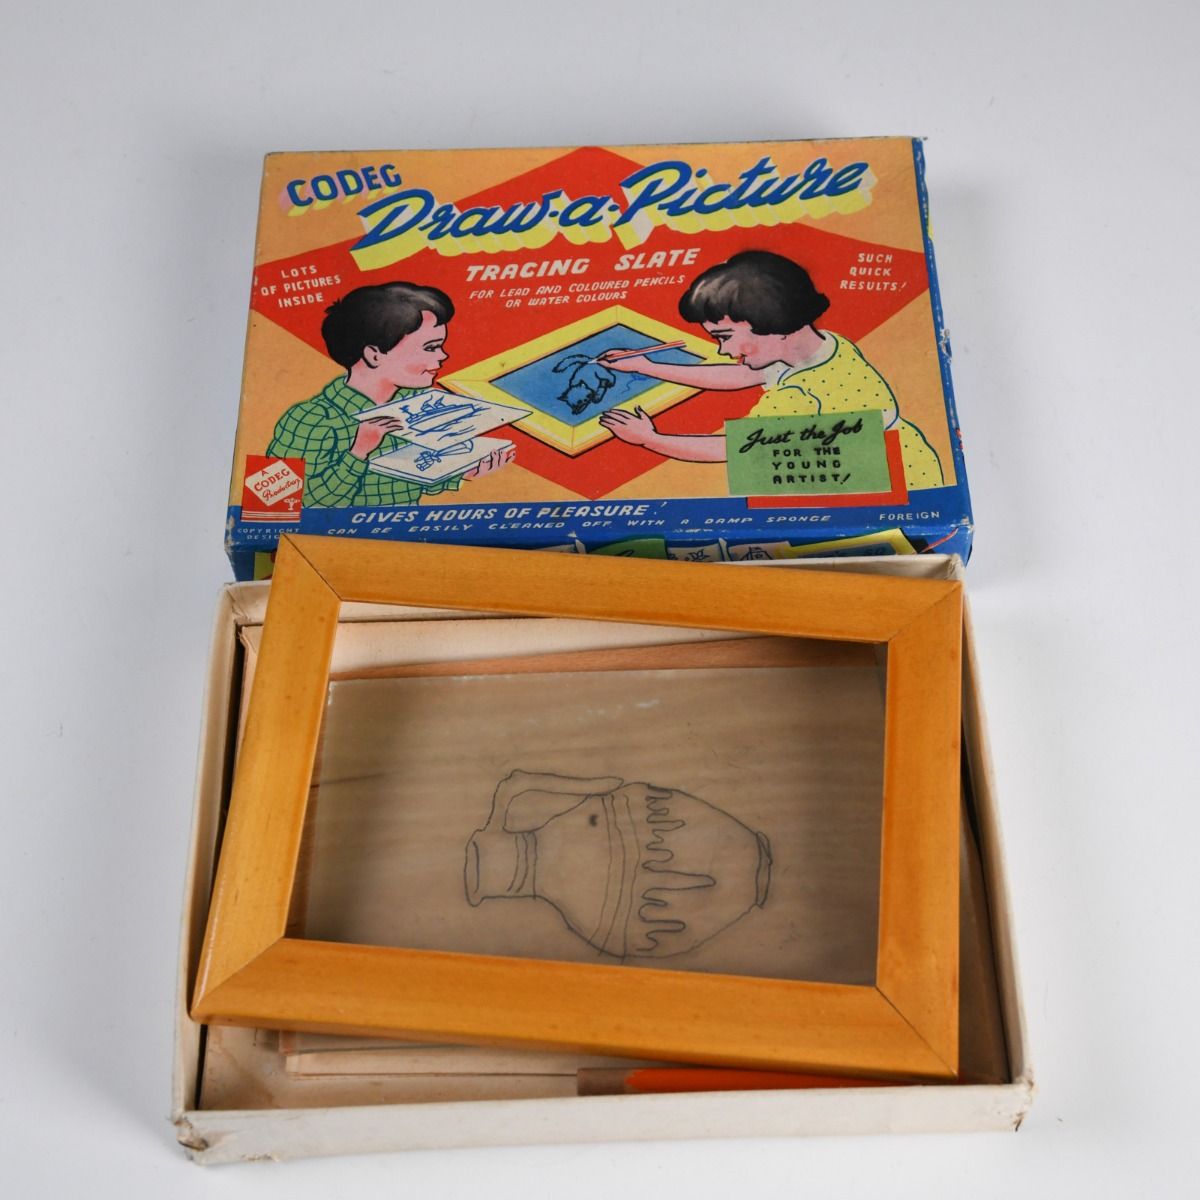 'Draw-A-Picture Tracing Slate' 1950s Children's Toy